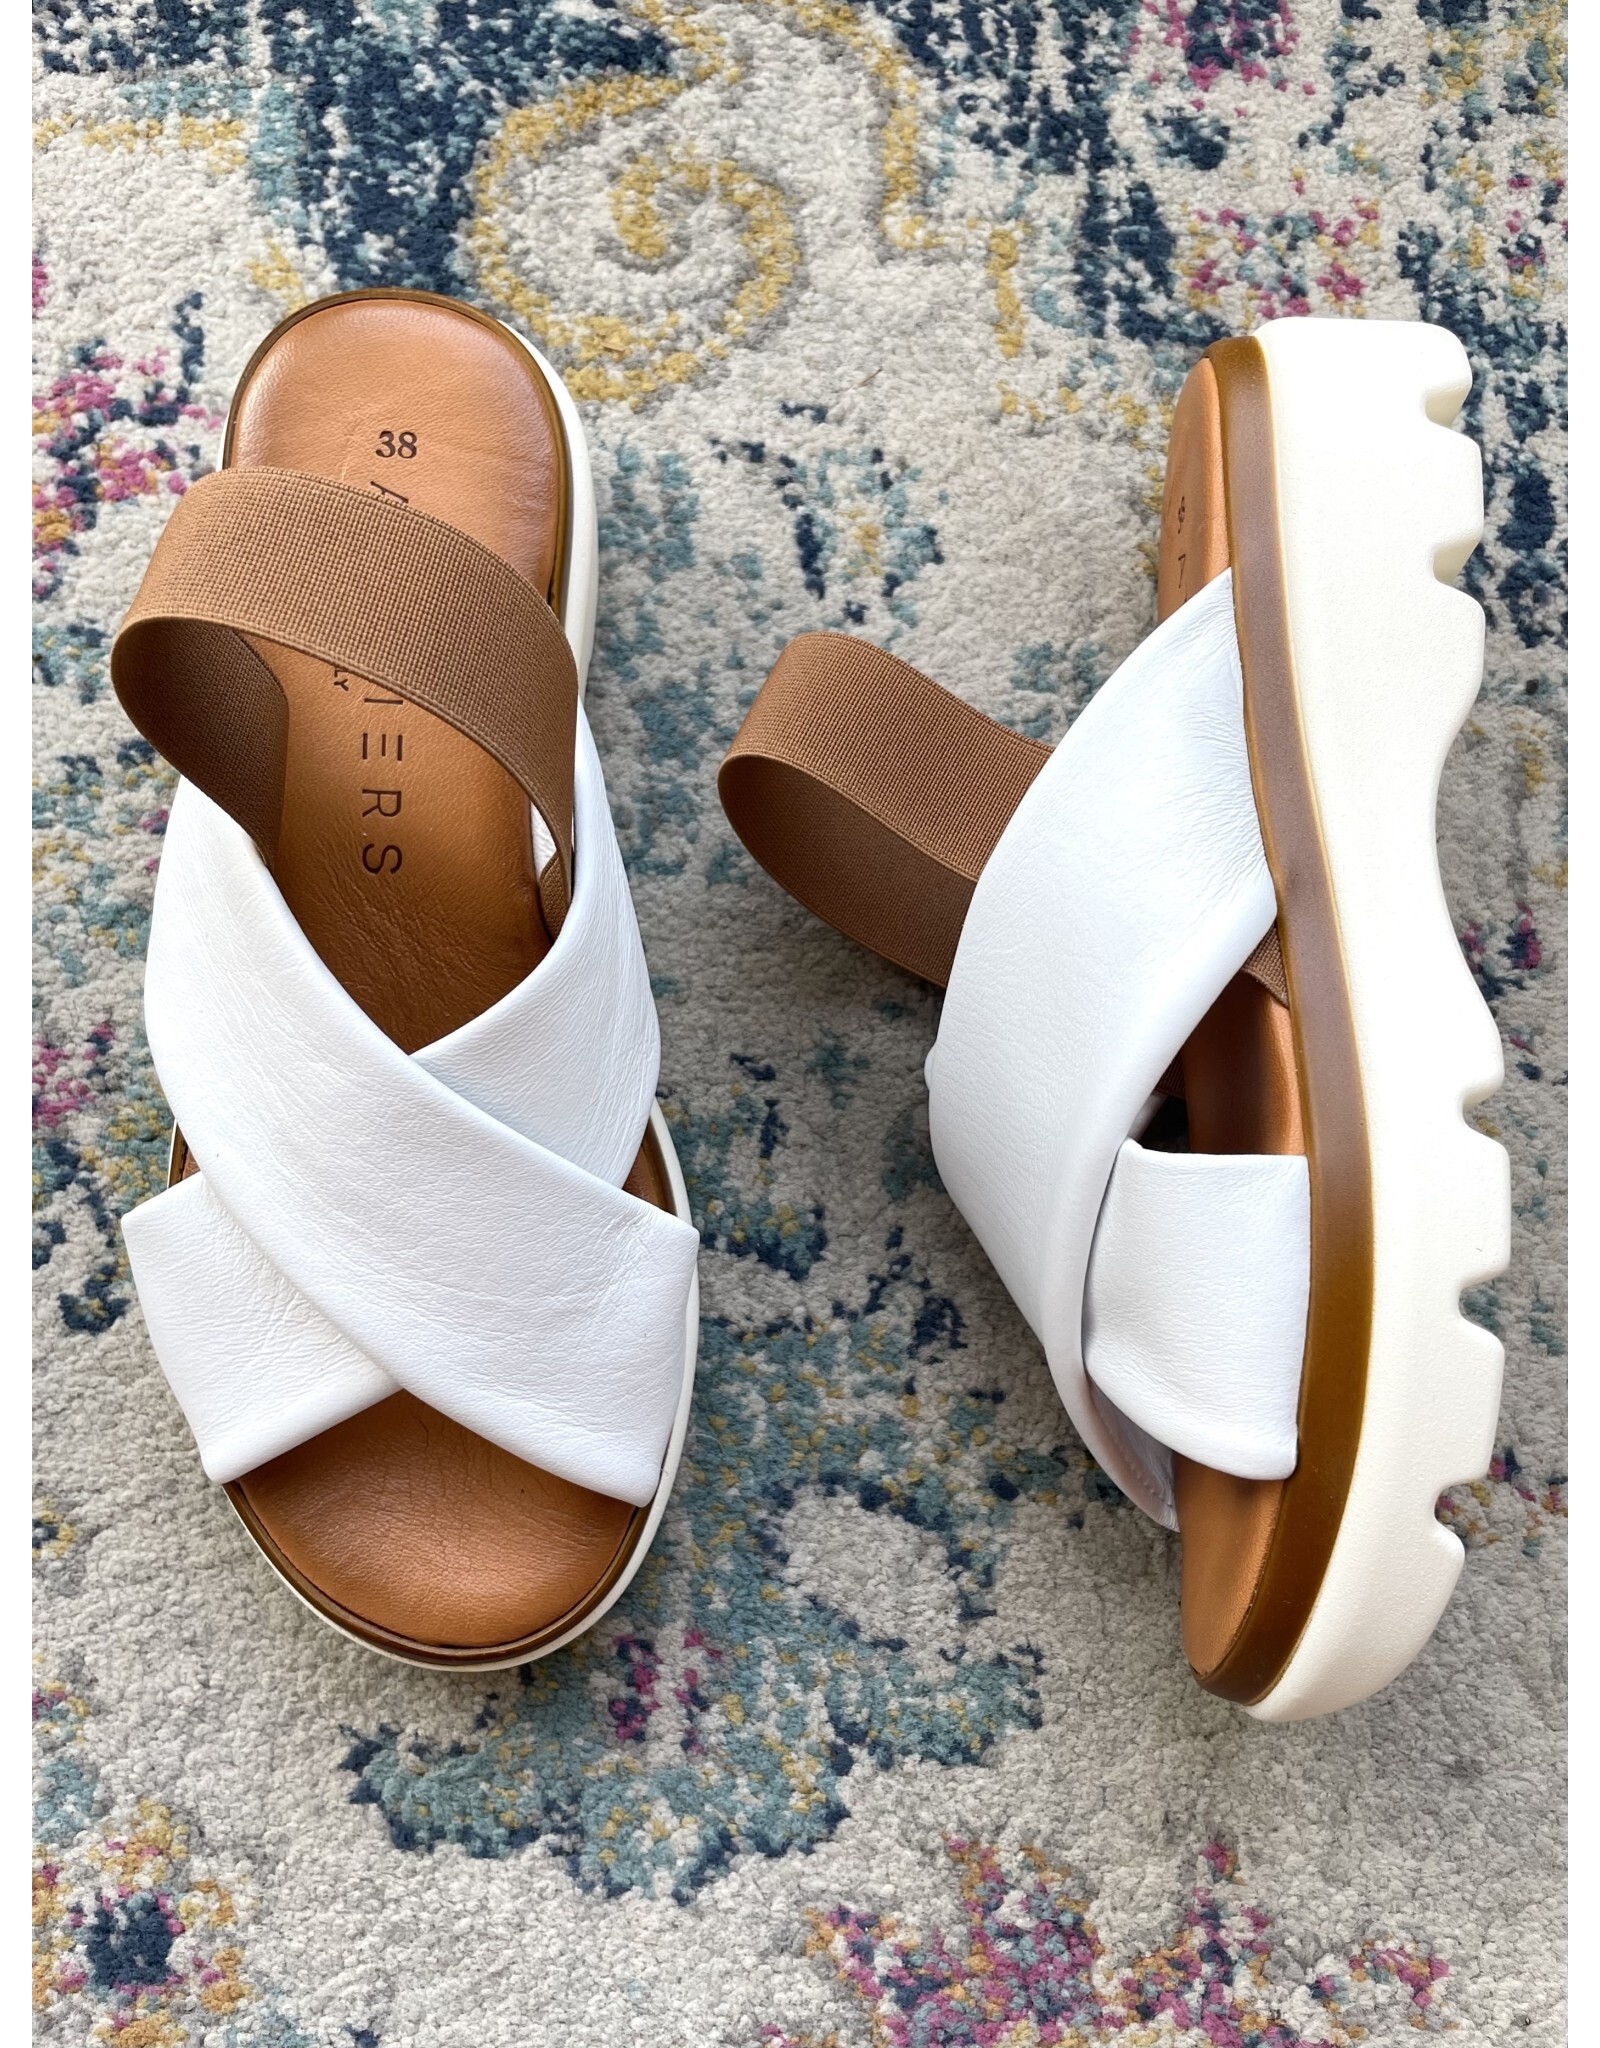 Ateliers Ateliers - Cara cross band sandal (White)